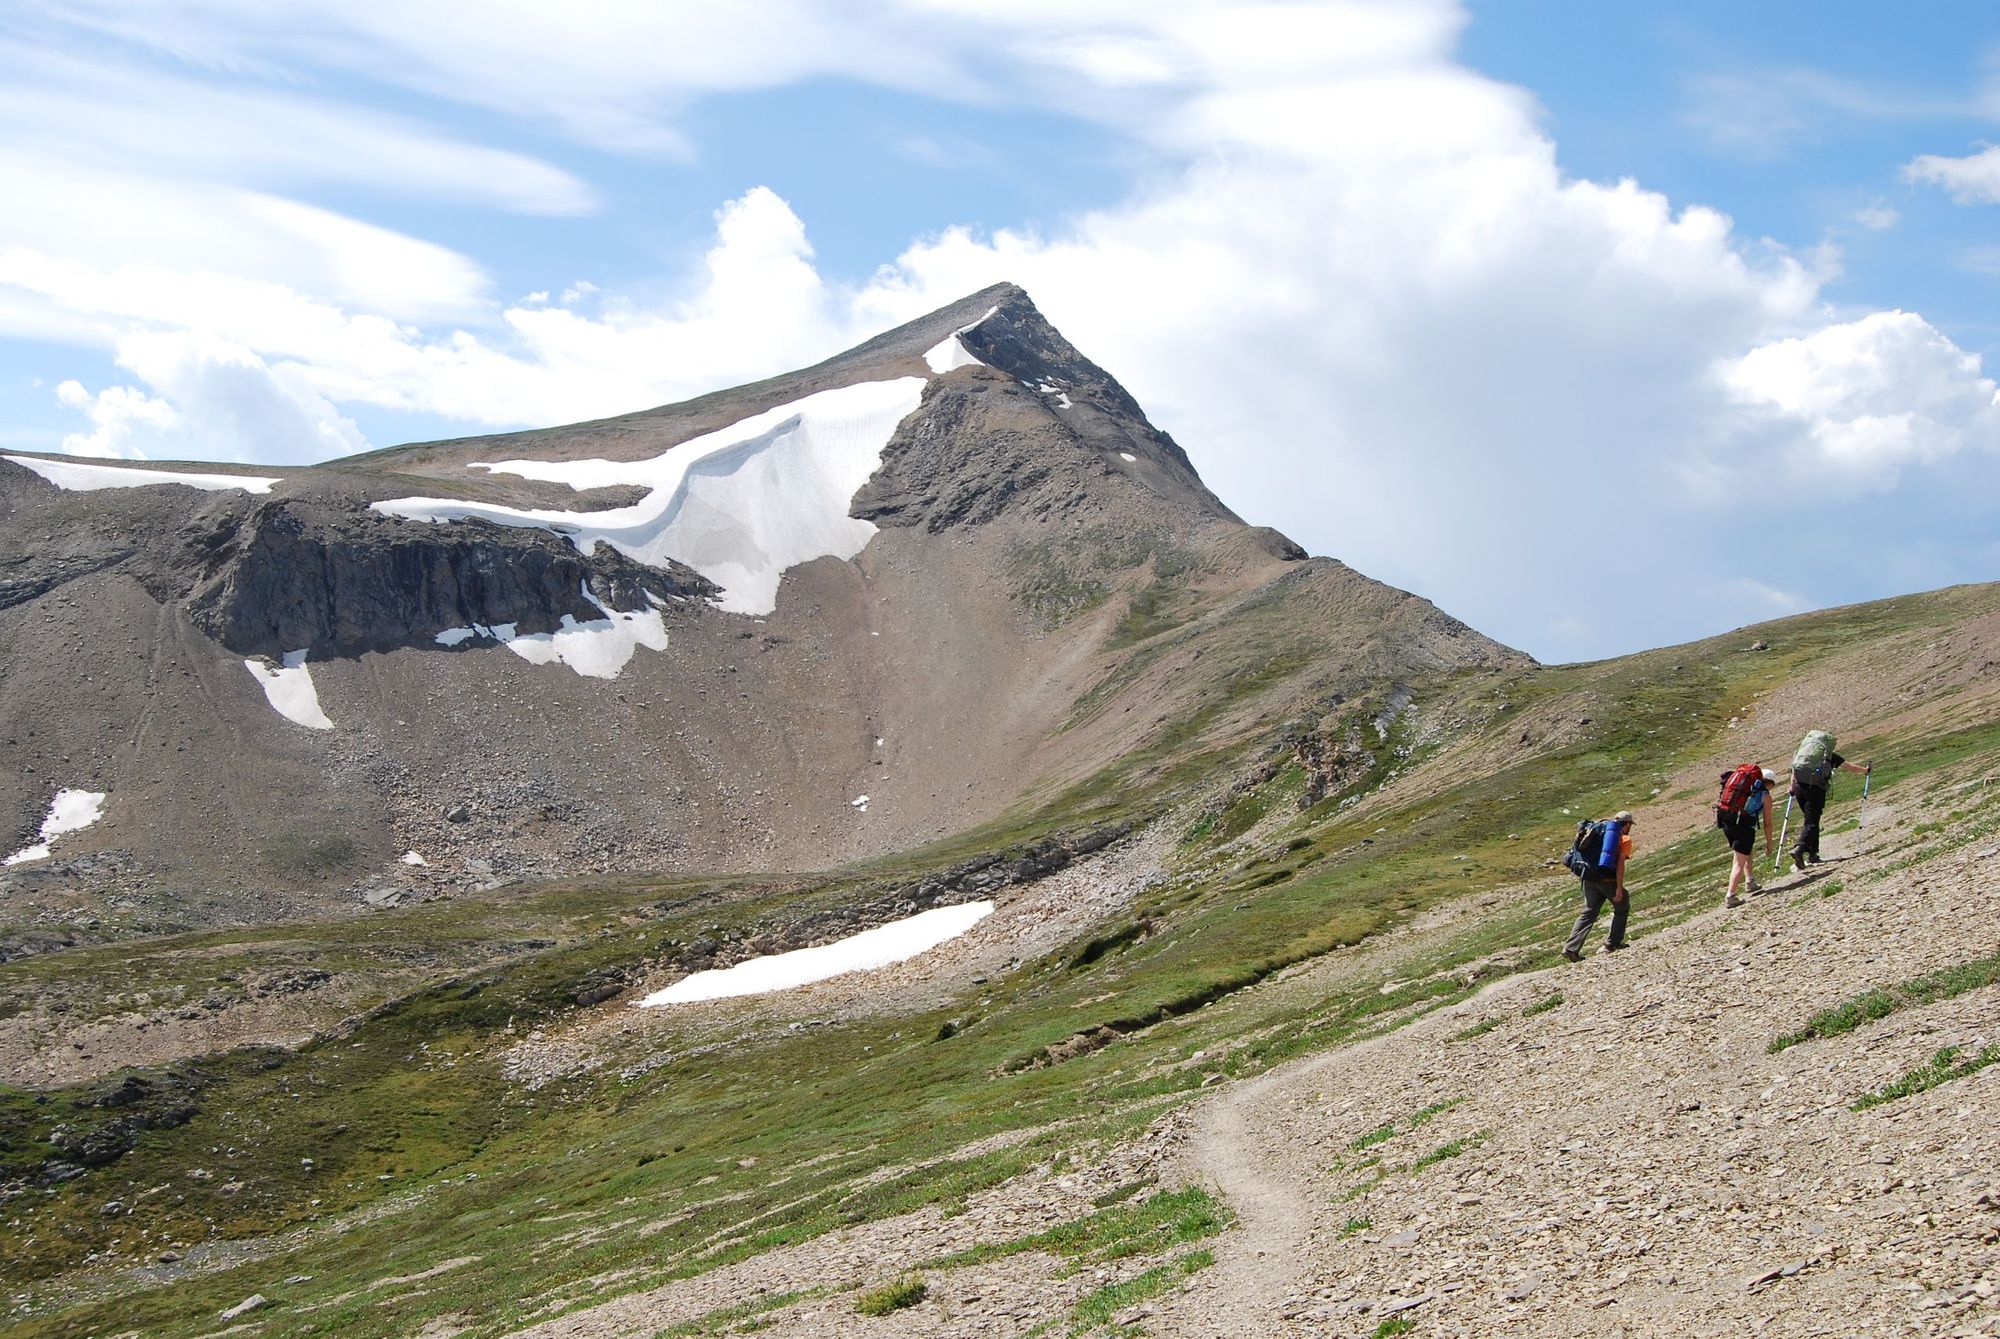 Curator Mountain, as viewed from the Skyline Trail. Photo: Michael Lawton / Wikimedia Commons, CC BY-SA 2.0